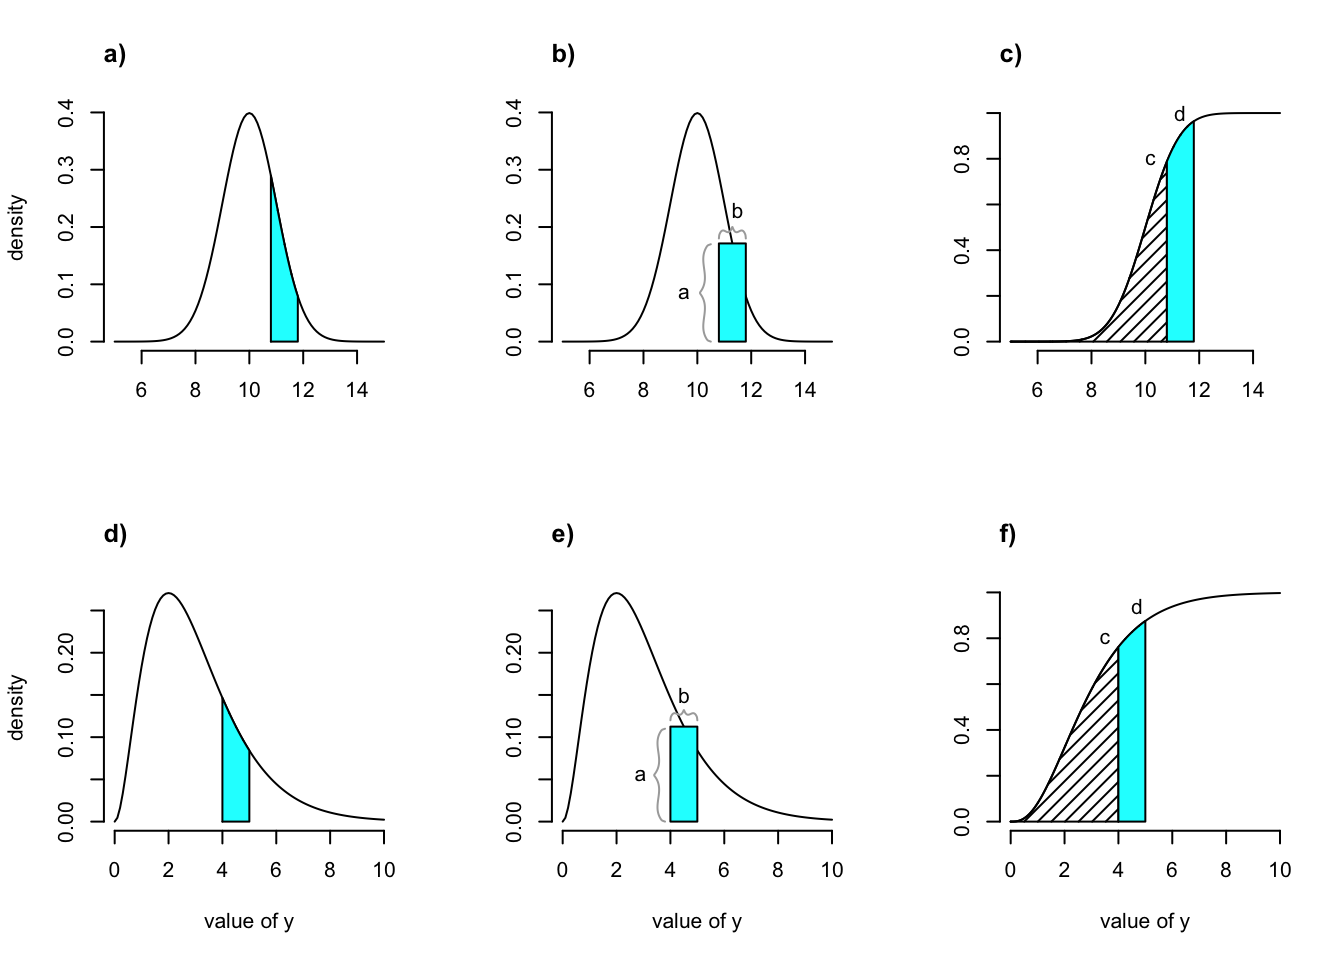 Shaded regions indicate the true size transition probability involved in transition (a,d), the estimated size transition probability via the midpoint method (b,e), and the estimated size transition probability via CDF (c,f) for the Gaussian (a-c) and gamma (d-f) distributions.